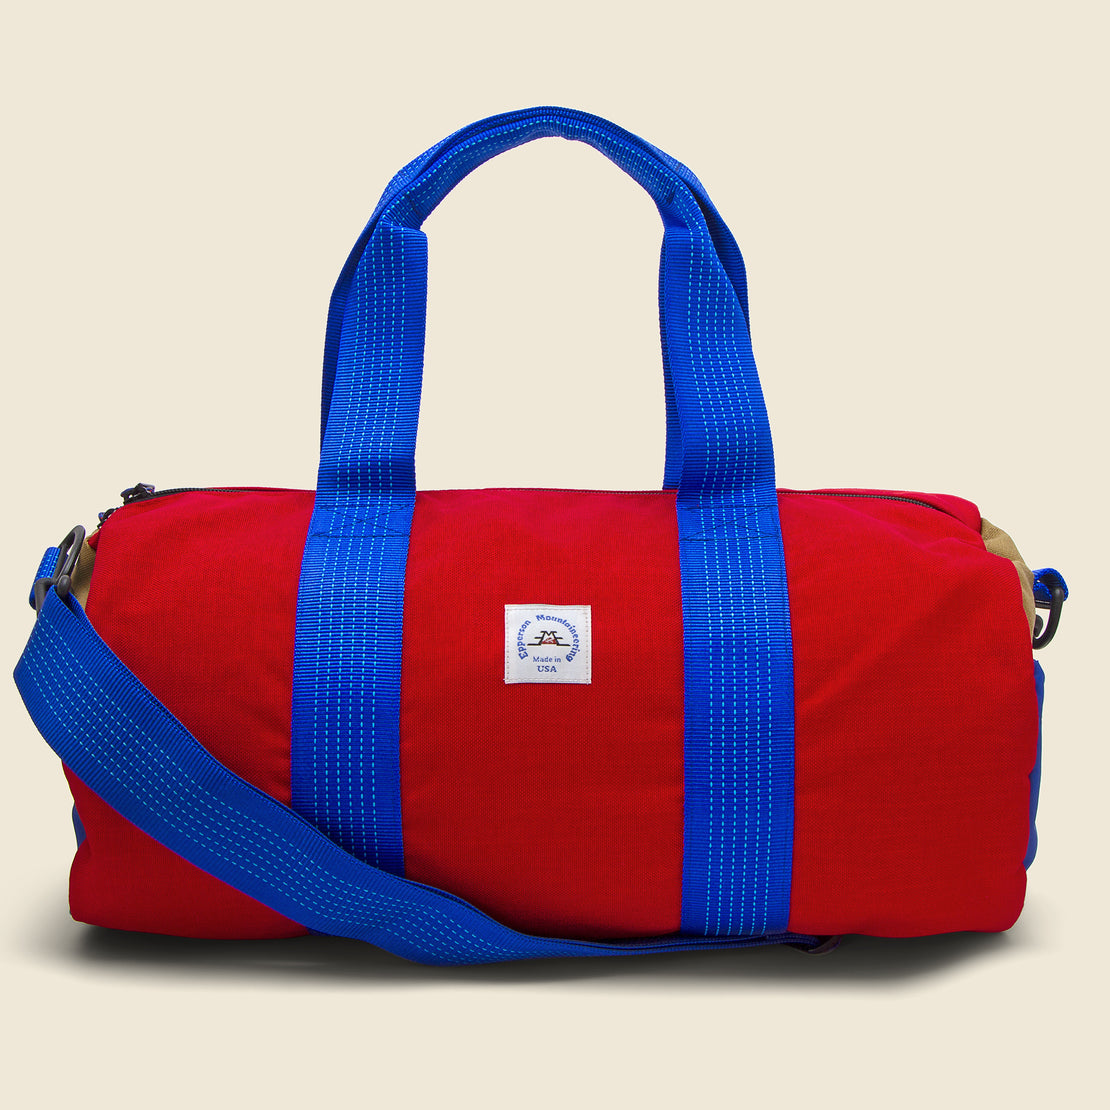 Epperson Mountaineering Duffle Bag - Barn Red